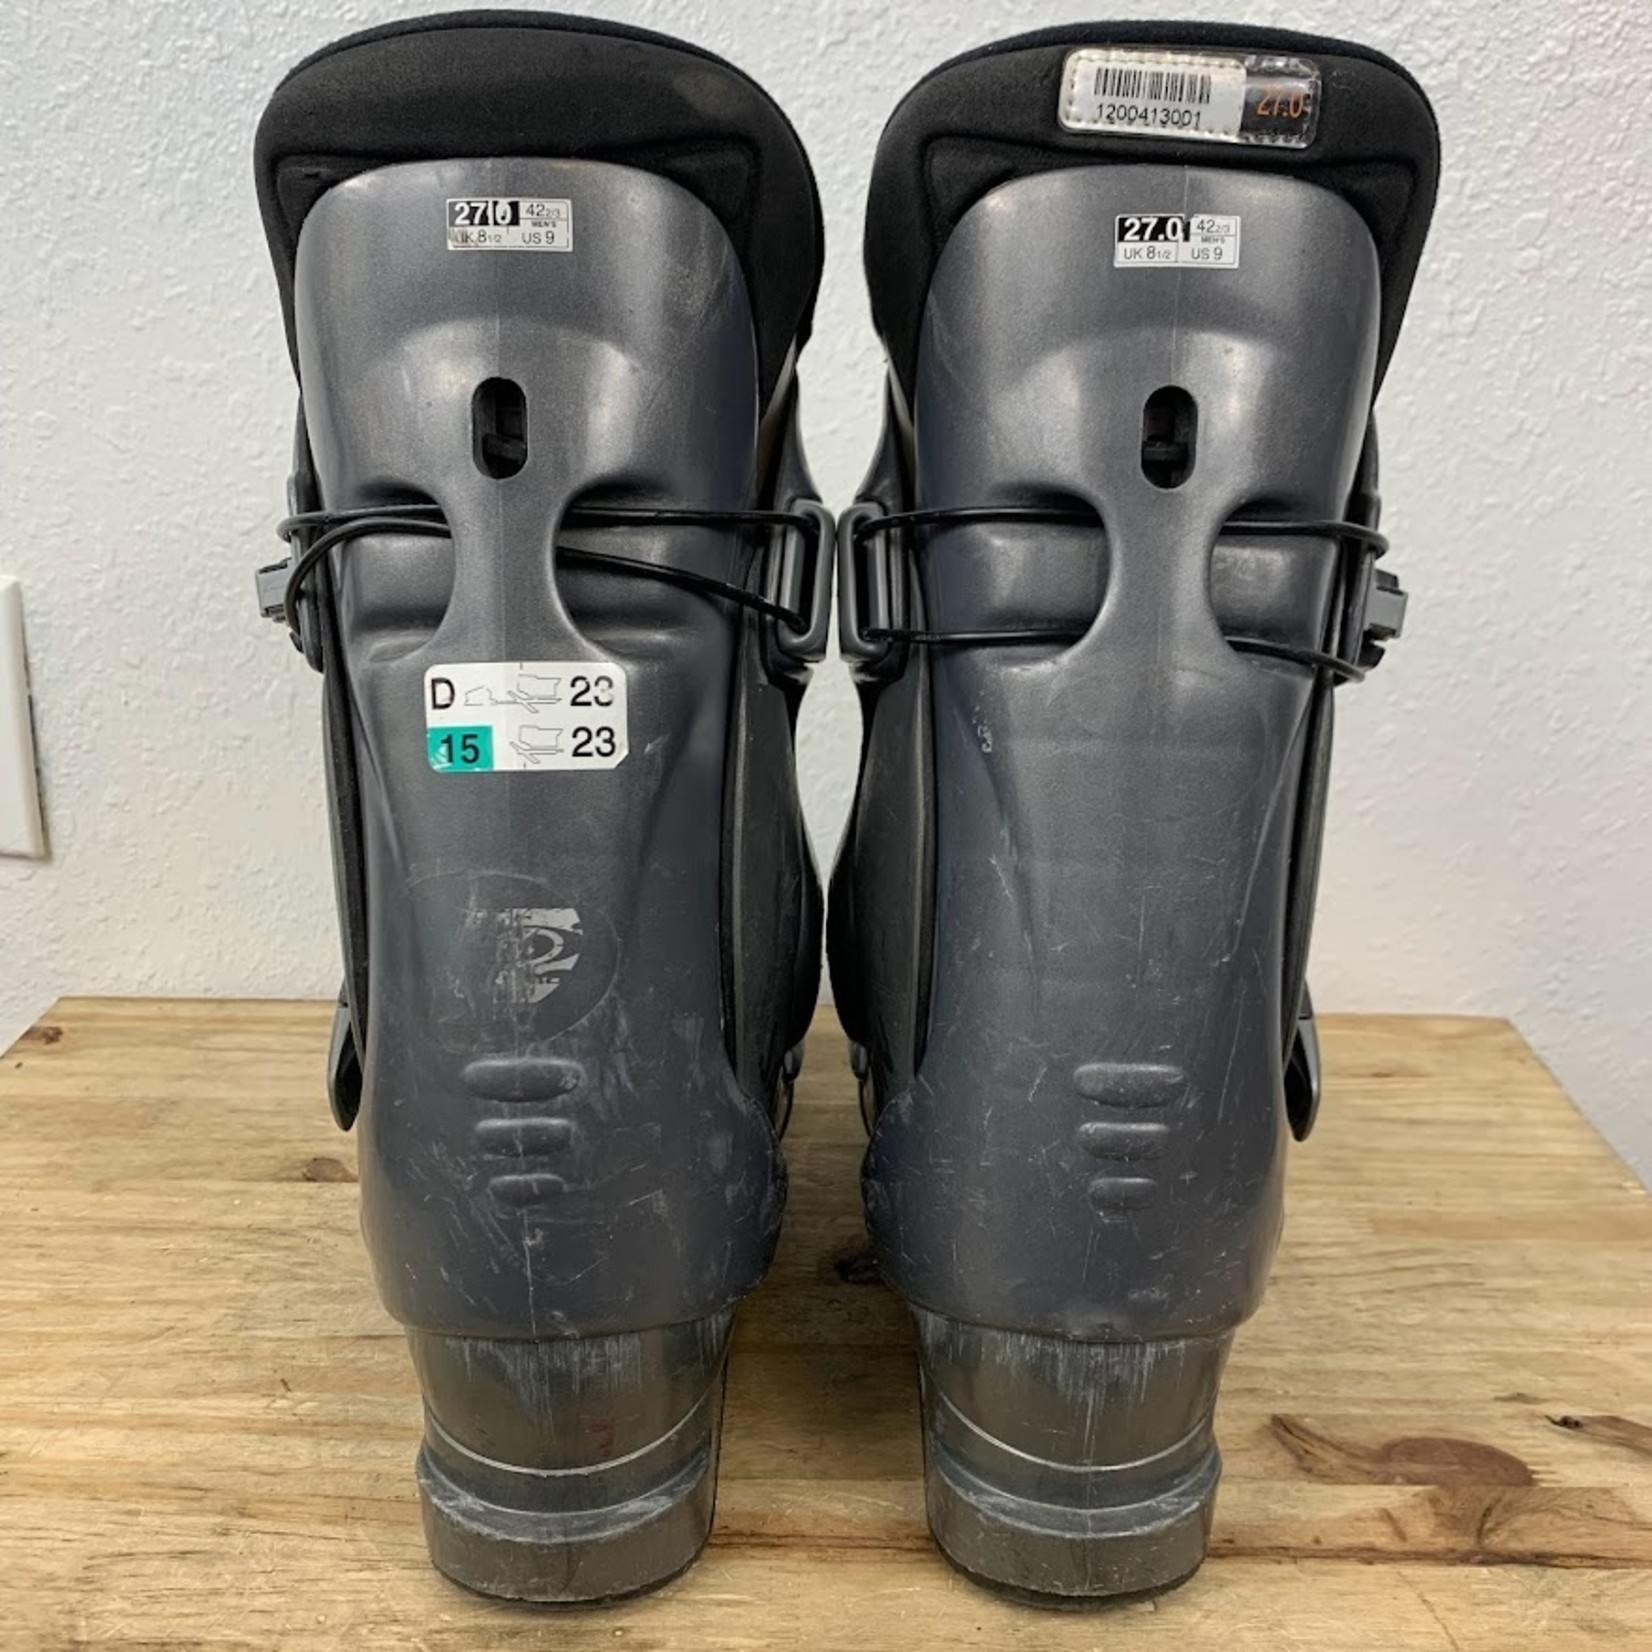 Salomon Symbio Rear Entry Ski Boots, Size 23/23.5  SOLD AS IS/NO REFUNDS/EXCHANGES